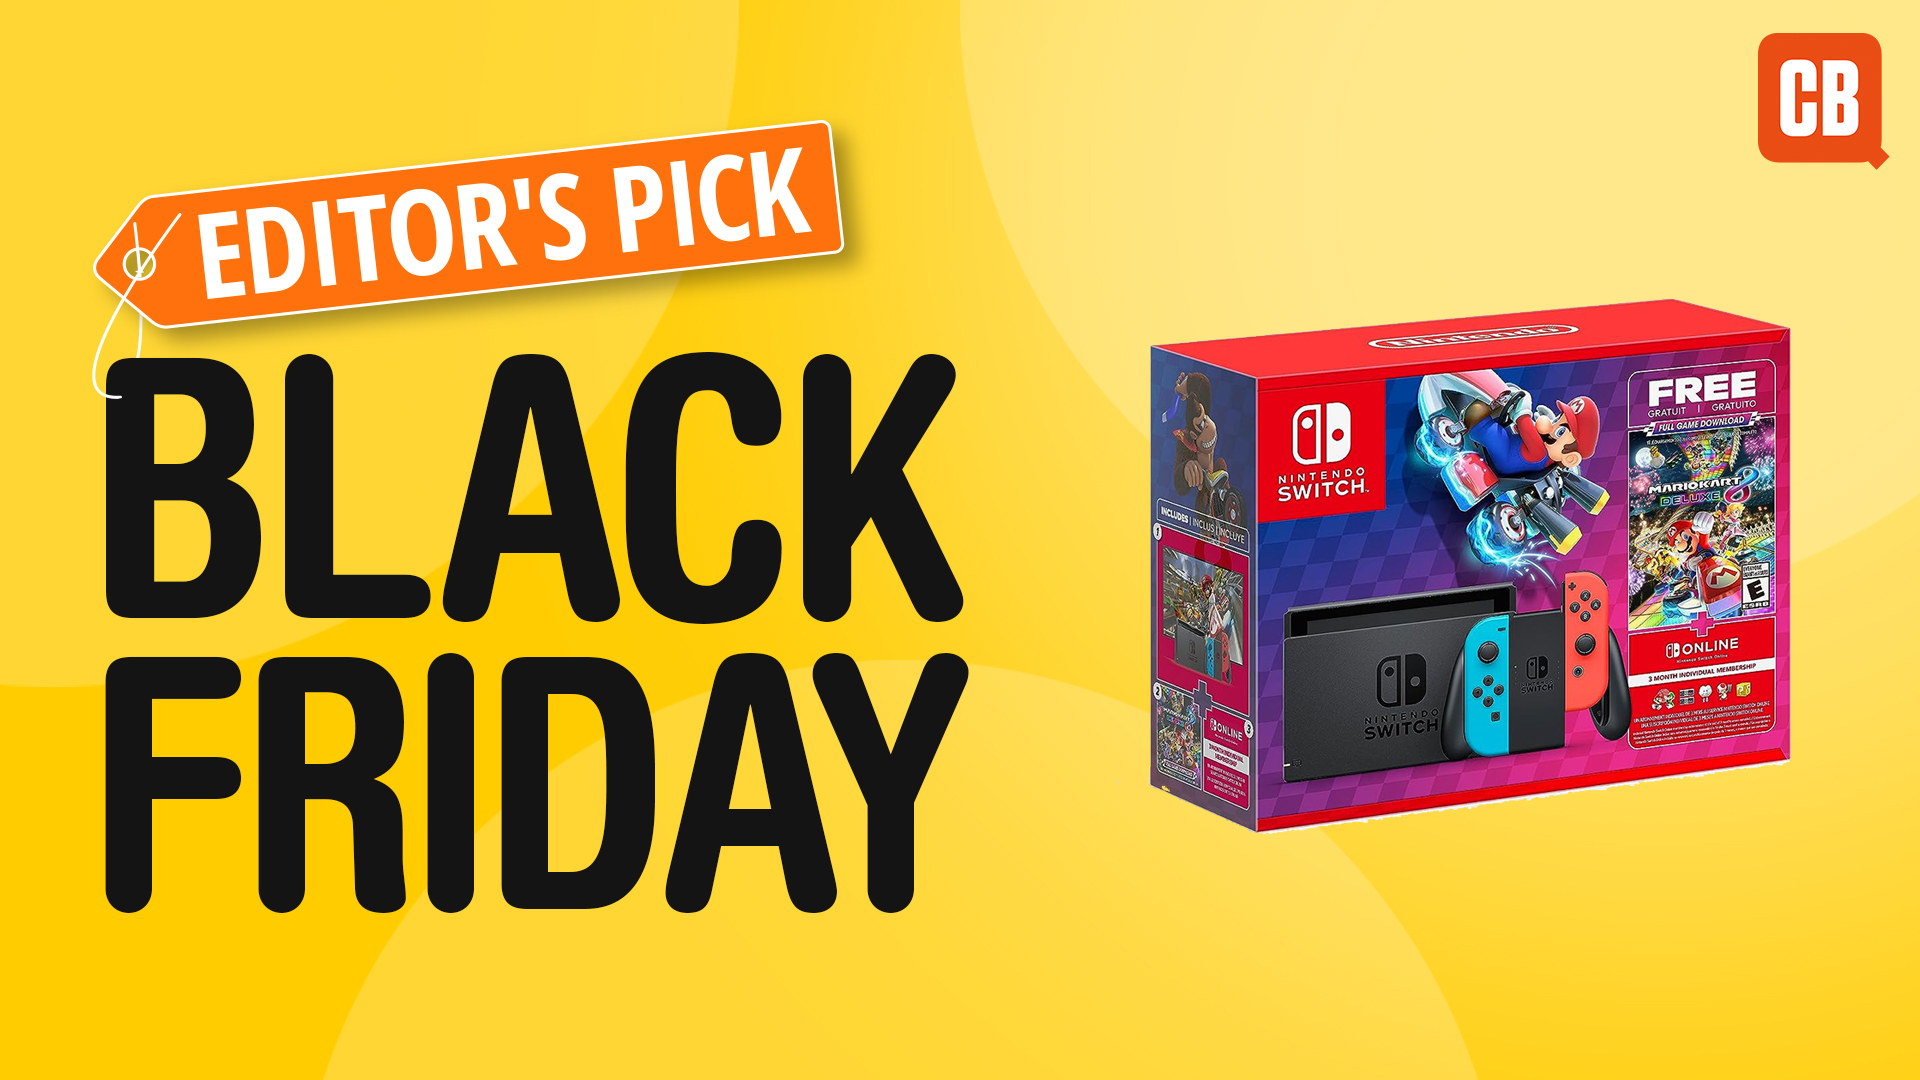 Best Black Friday Nintendo Switch deals — biggest discounts on bundles,  games and accessories